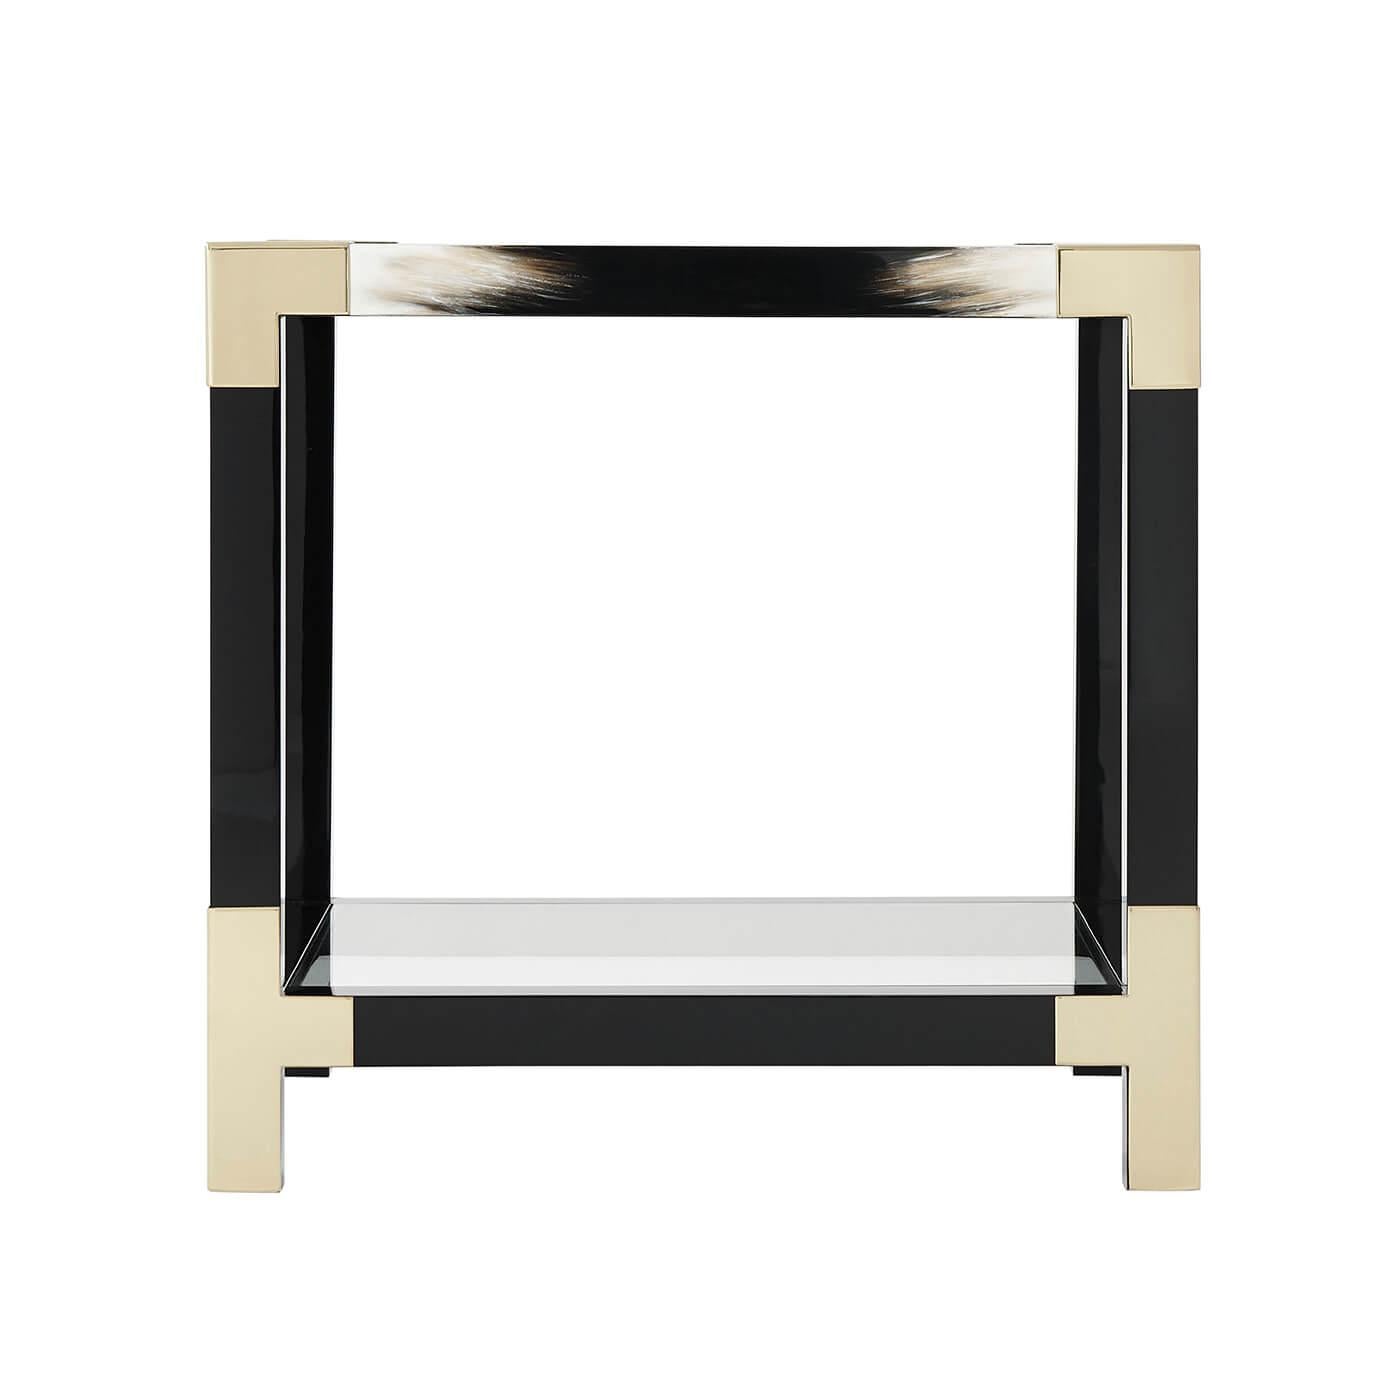 A black lacquered and faux horn painted accent table, the square glass inset top with brass edged corners, on square legs joined by stretchers and an inset glass undertier.

Dimensions: 25